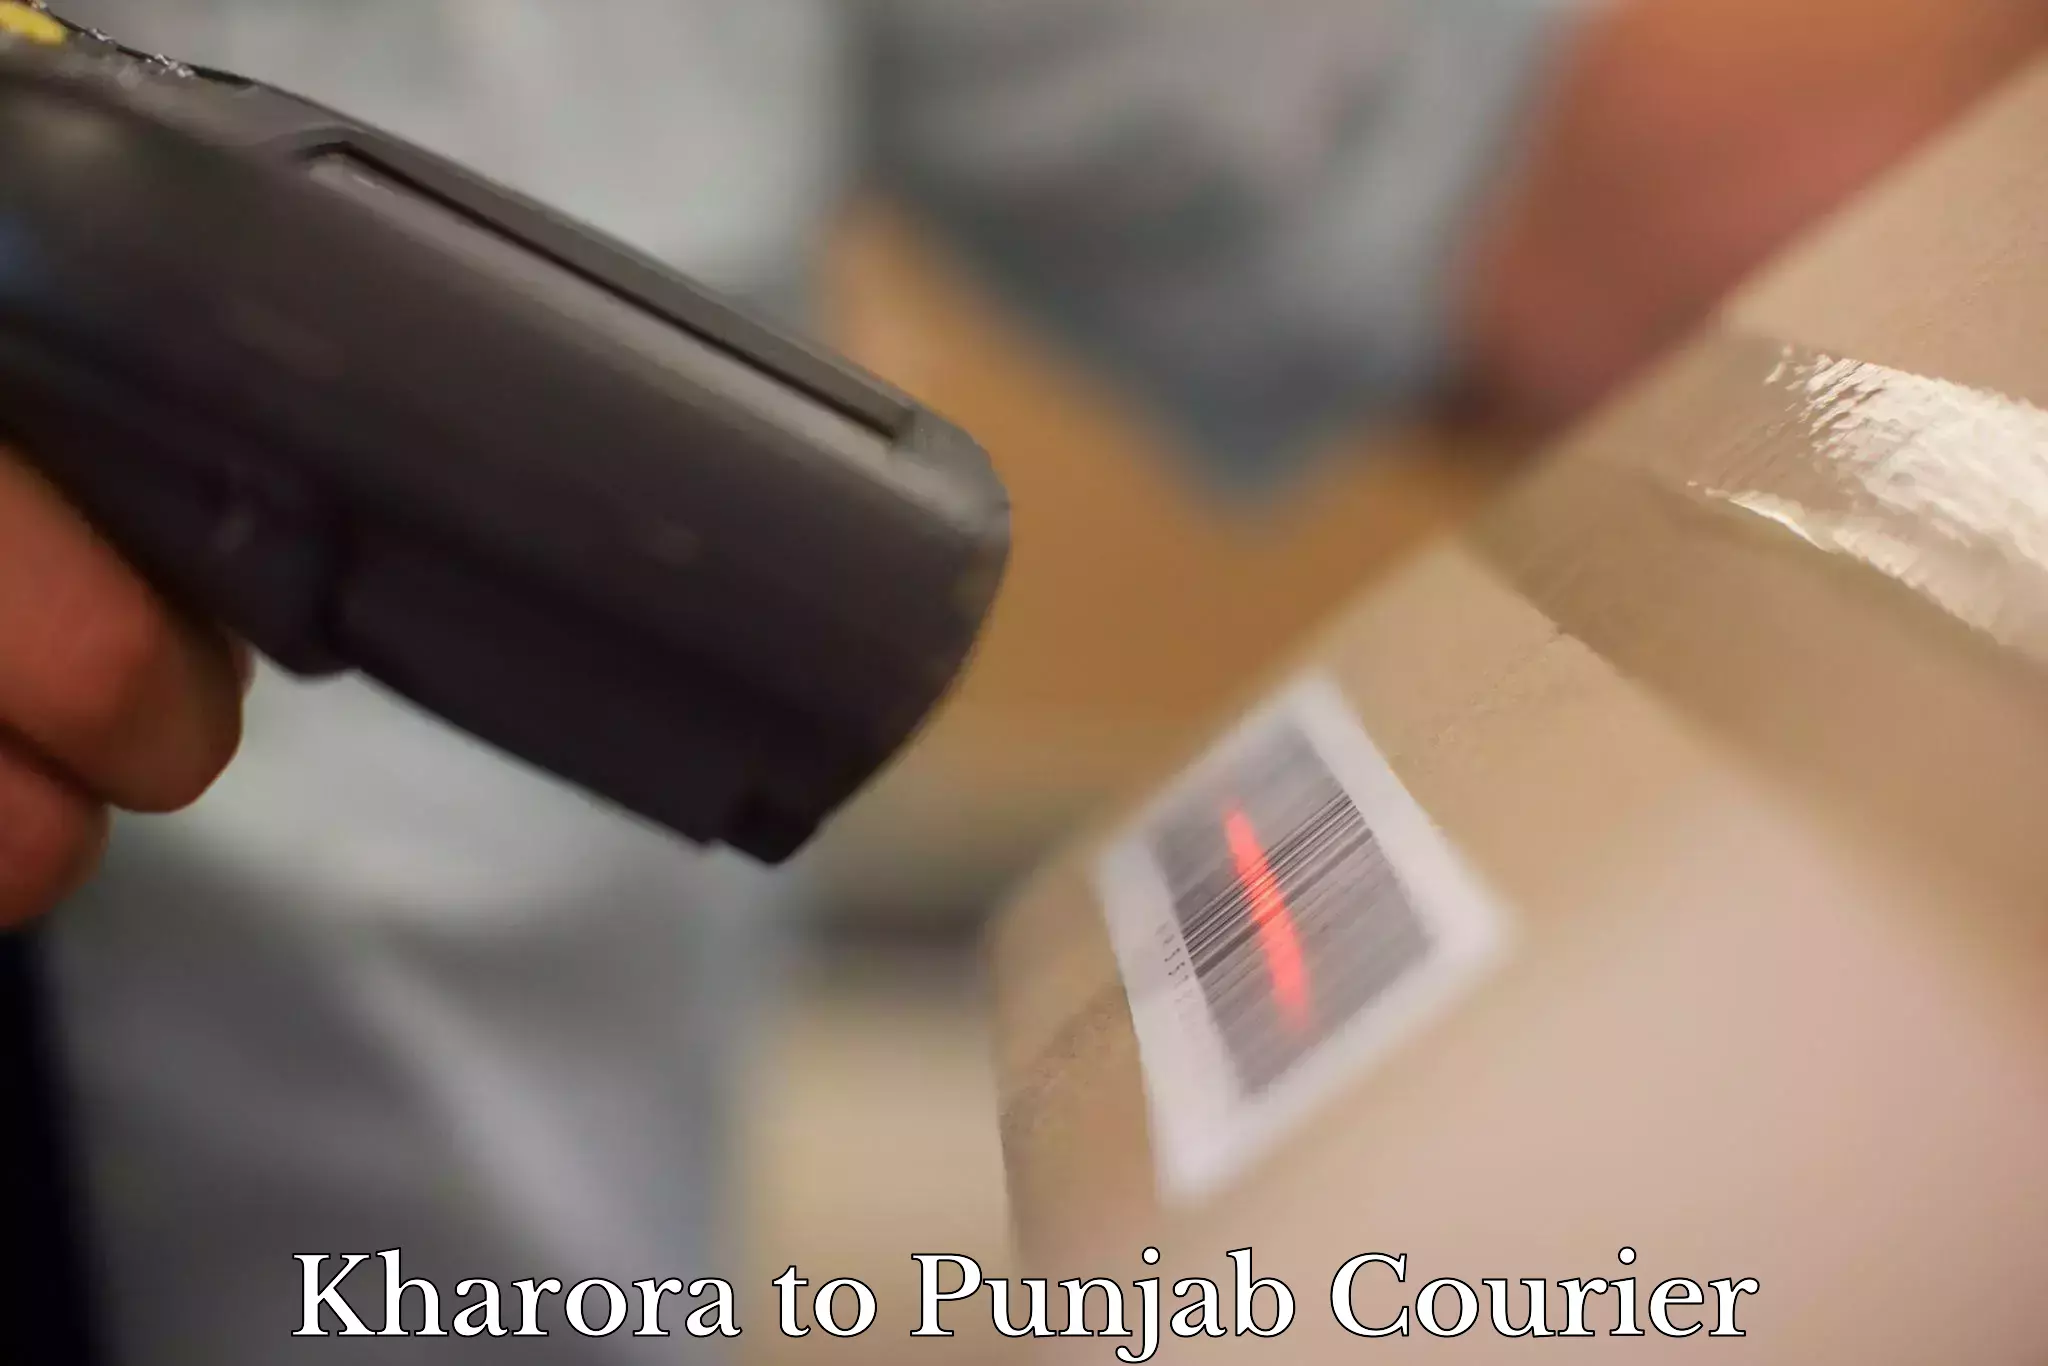 Professional moving assistance in Kharora to Khanna